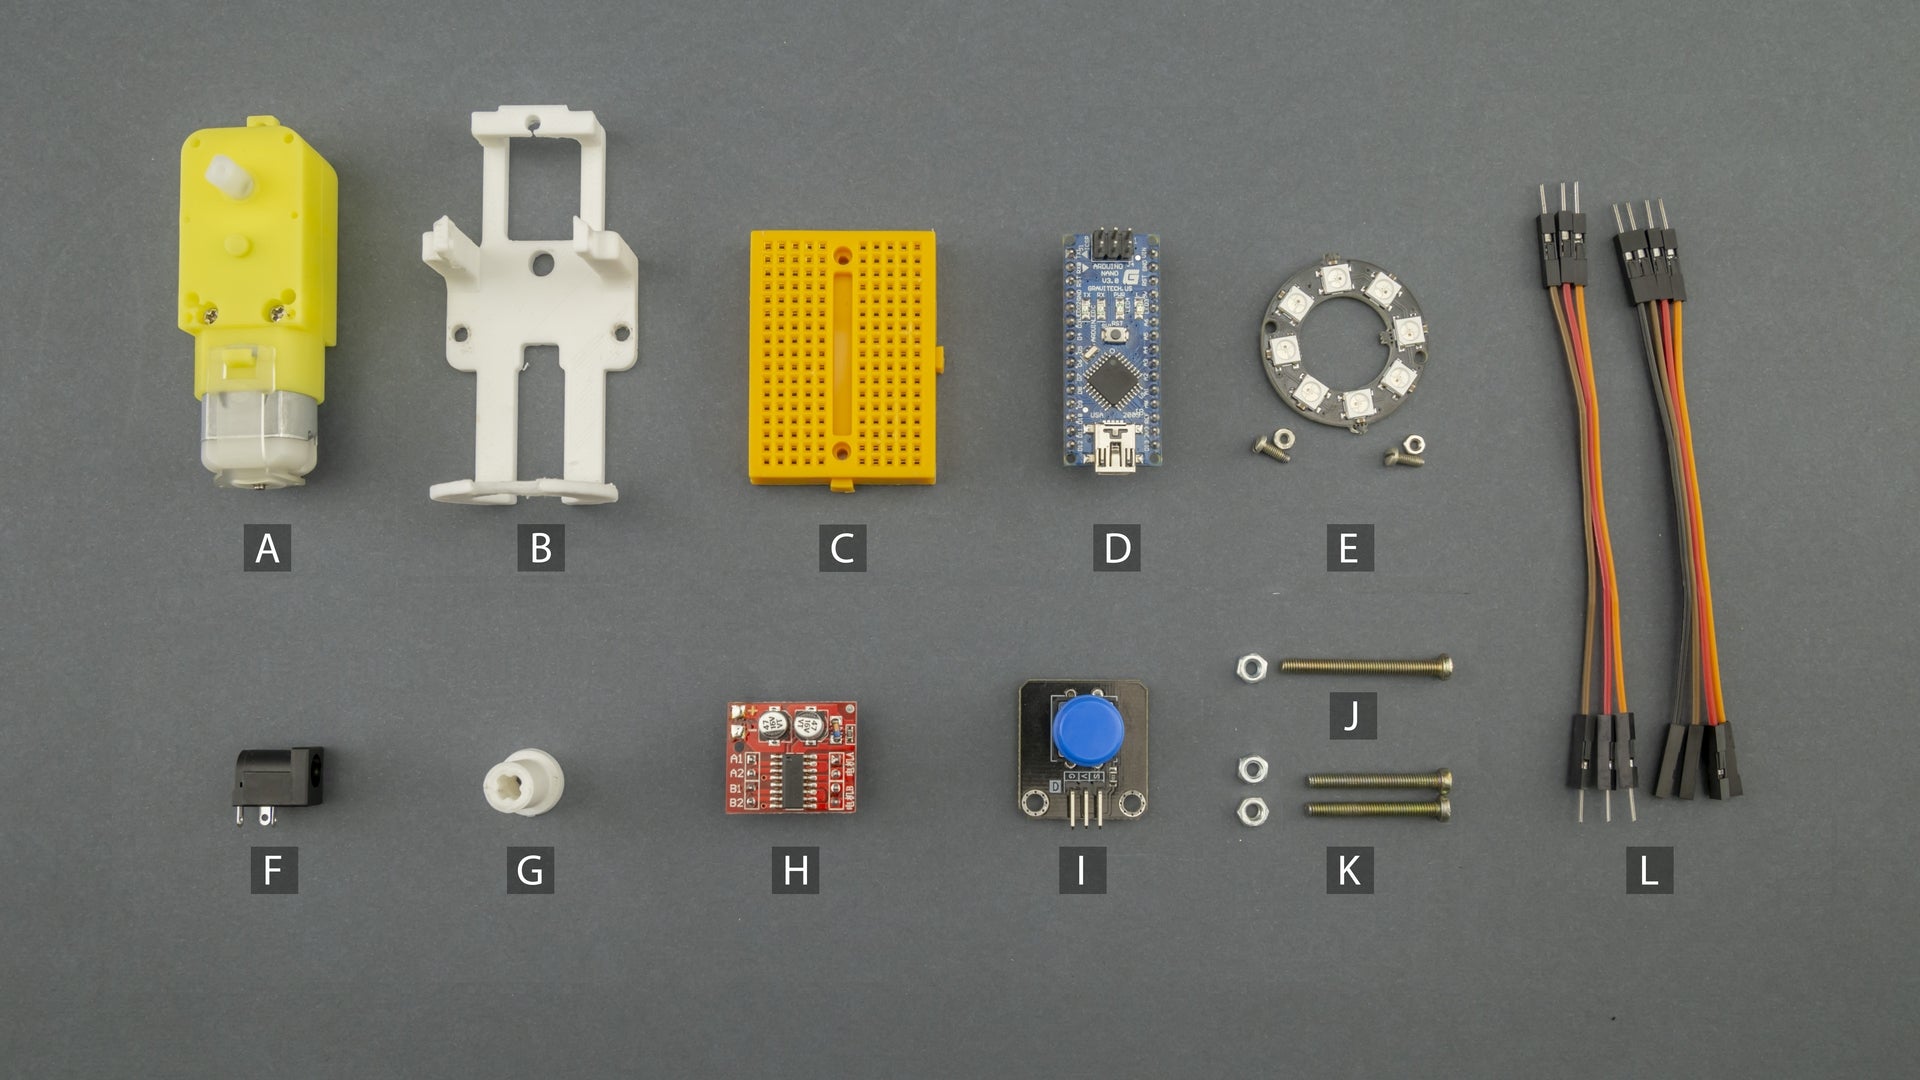 You can create a Biped robot with a DC motor and LEGO®-compatible blocks with your kids.